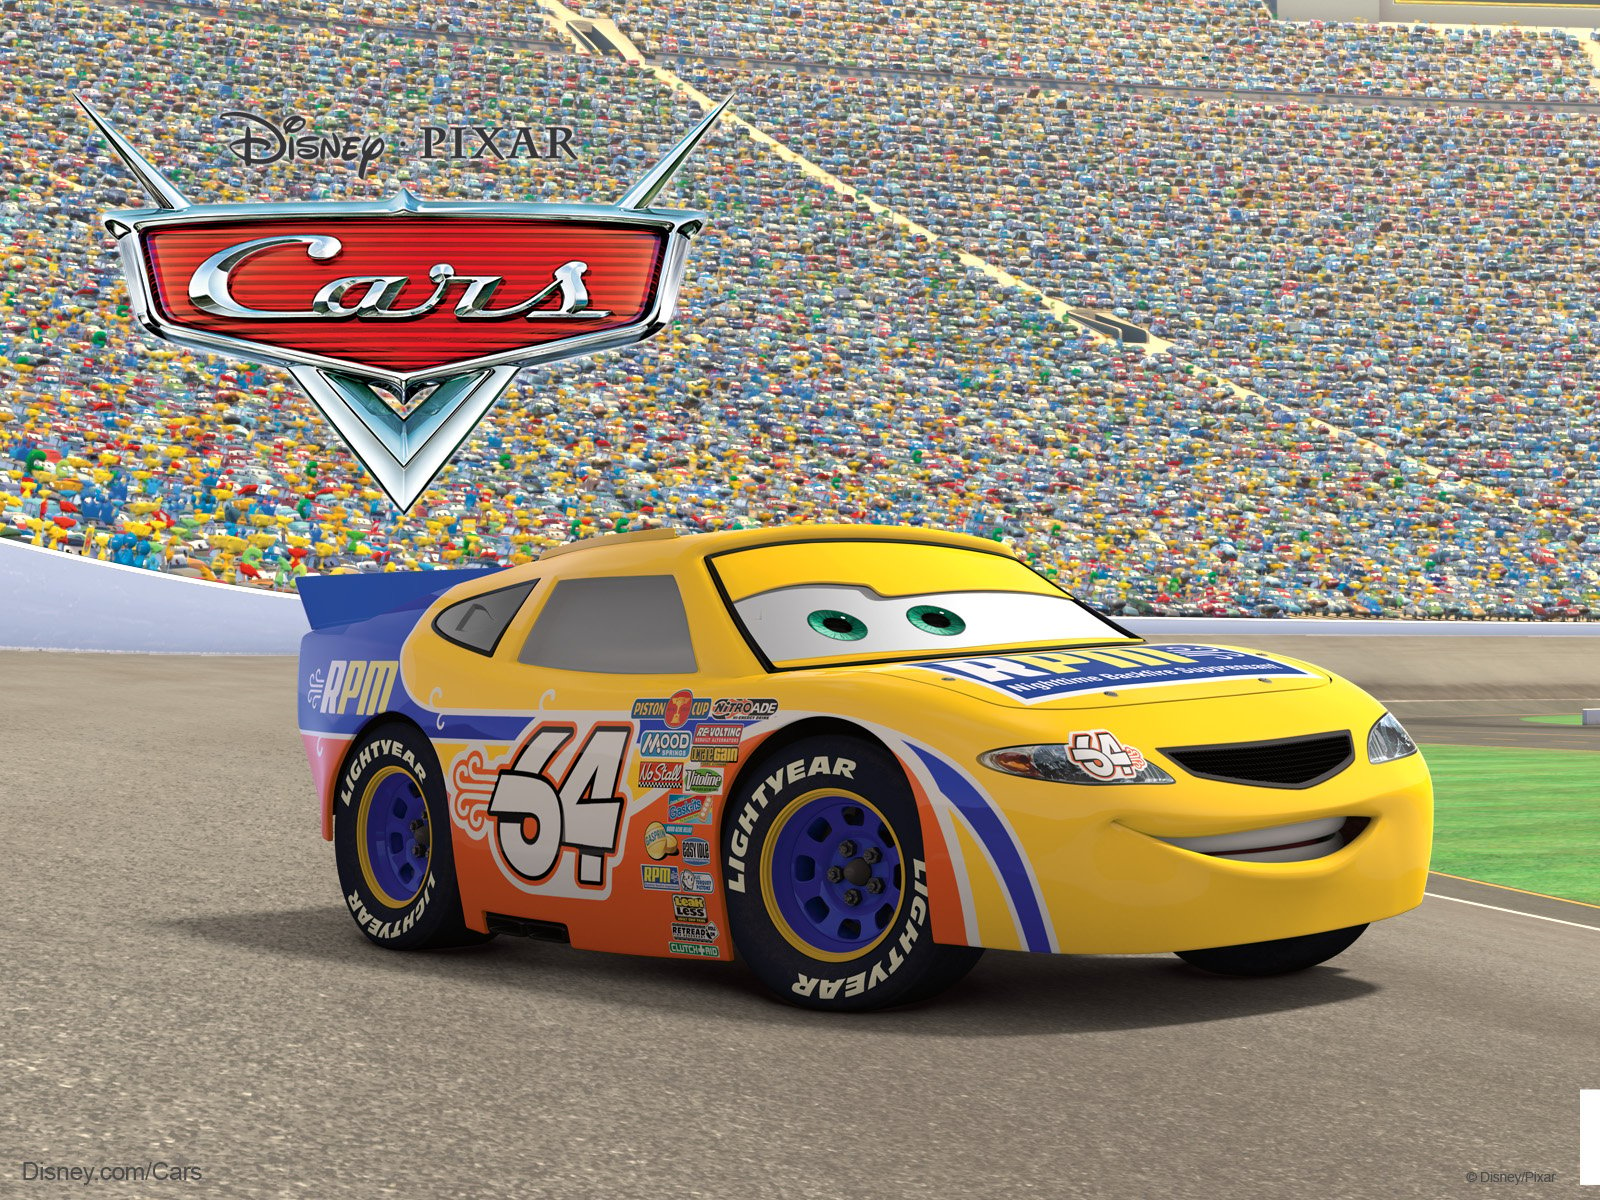  Rutherford Race Car from Pixar Cars Movie wallpaper   Click